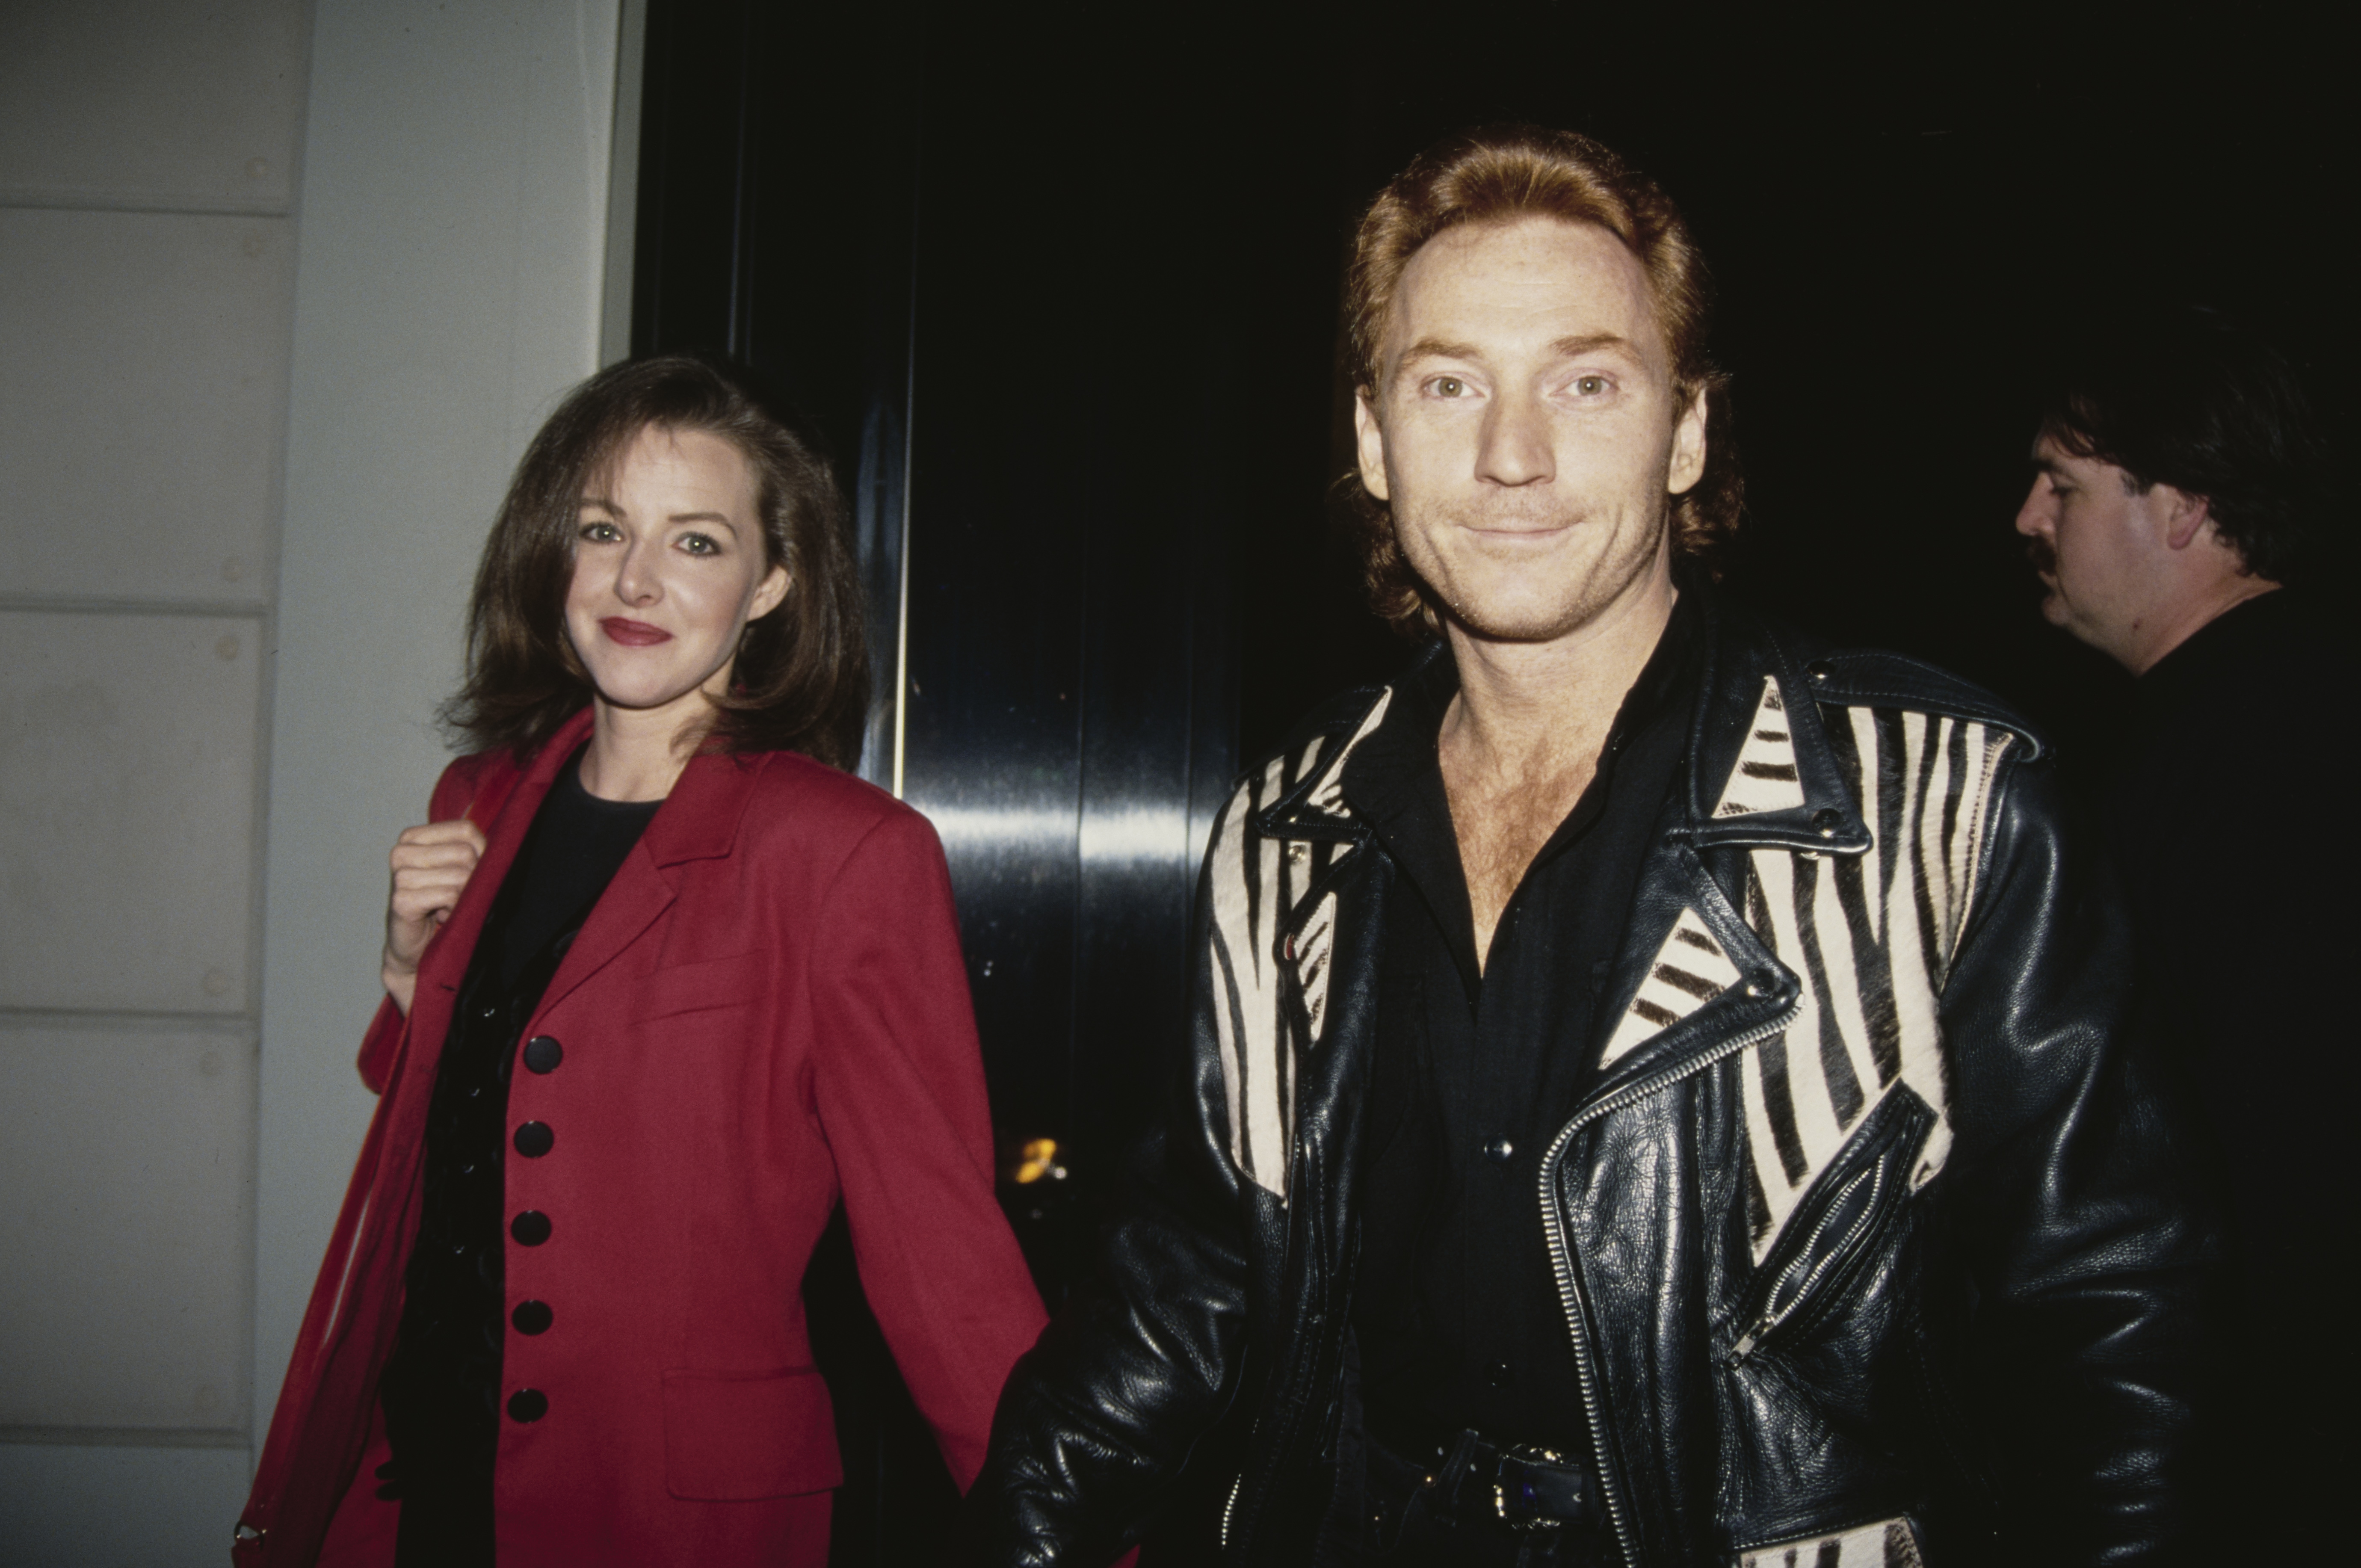 Gretchen Hillmer Bonaduce, and her husband, American actor and comedian Danny Bonaduce in 1993 | Source: Getty Images